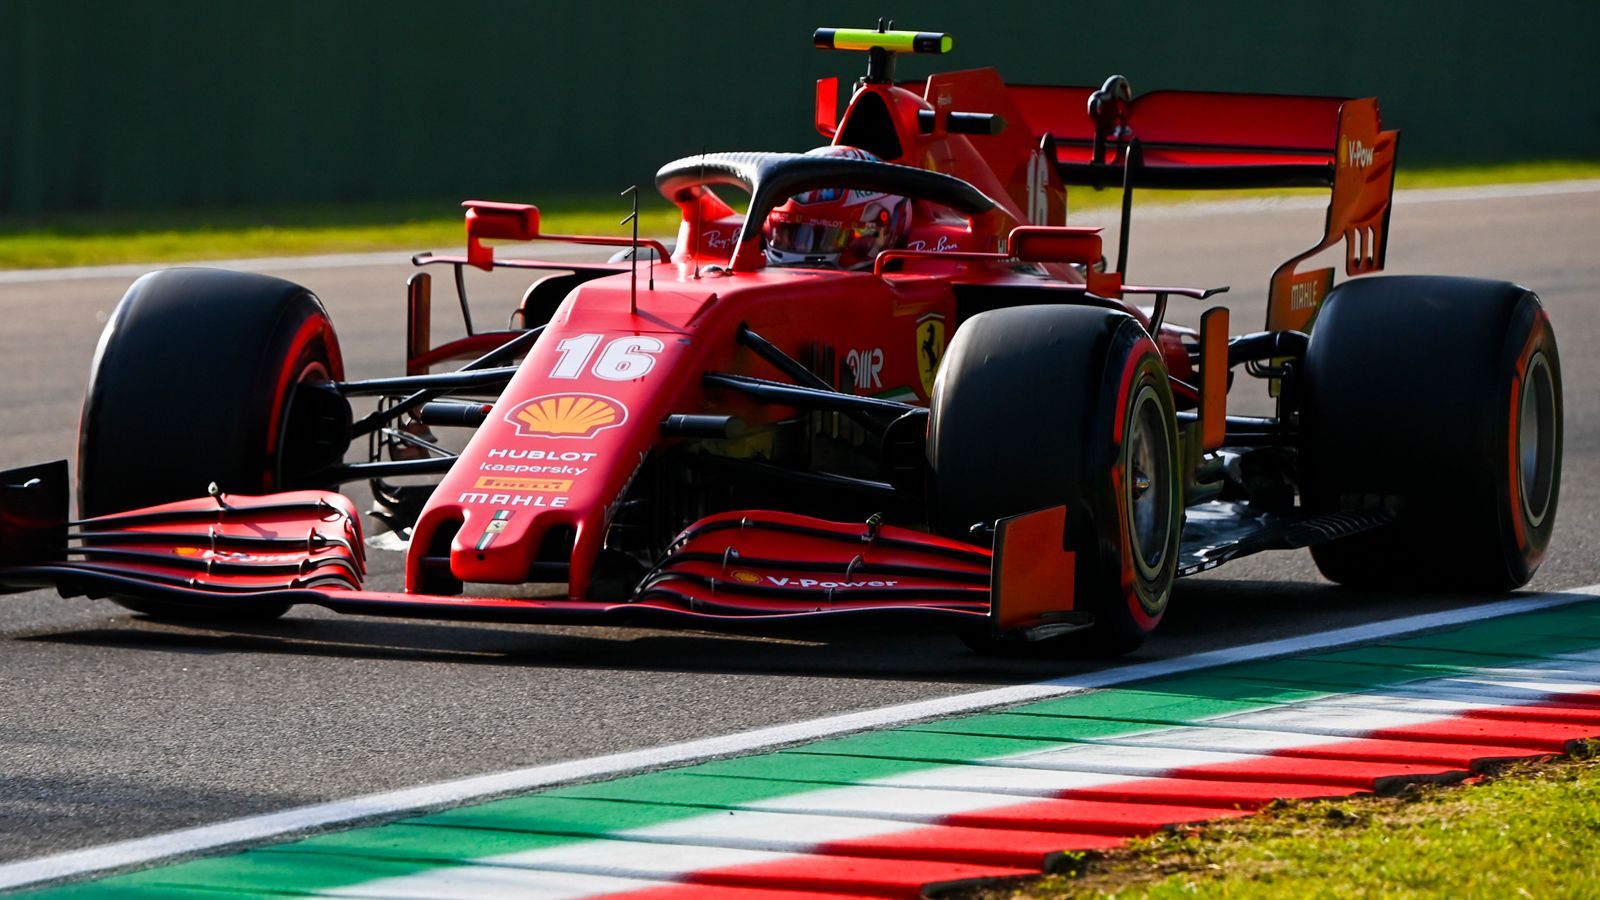 Ferrari reveal engine plan for F1 2021 and 'very promising' signs